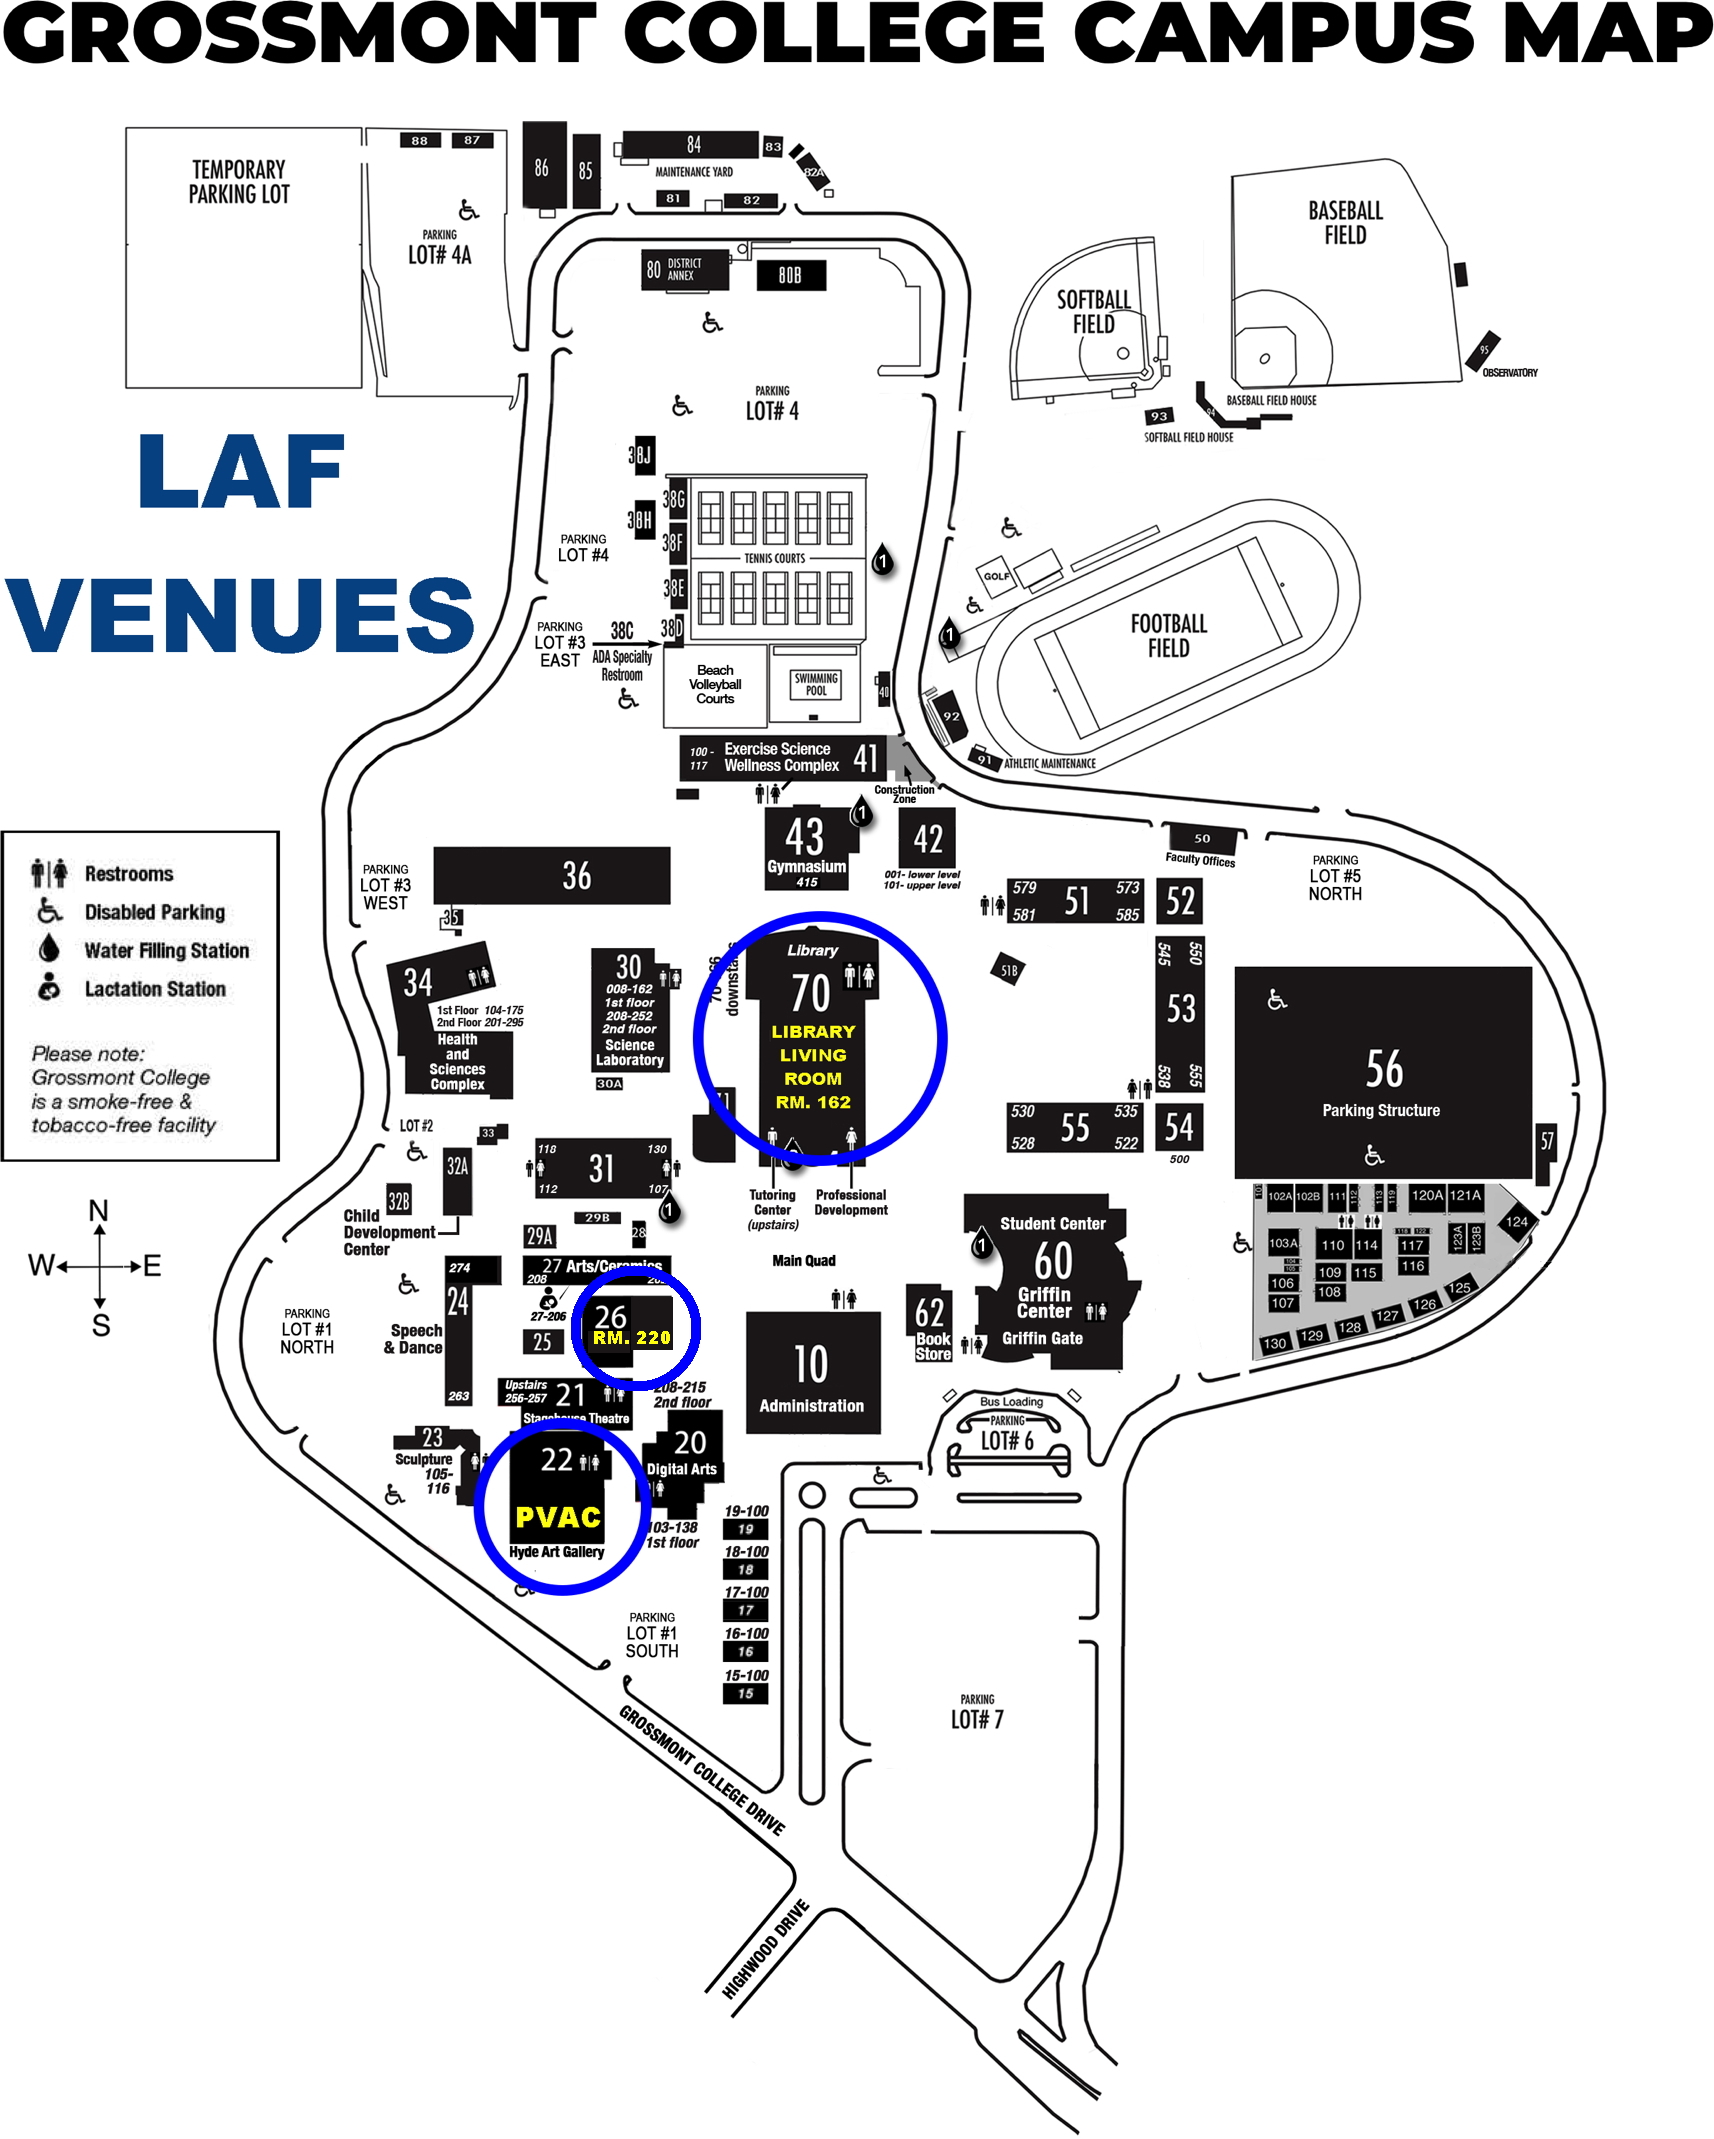 a campus map identifying LAF venues 